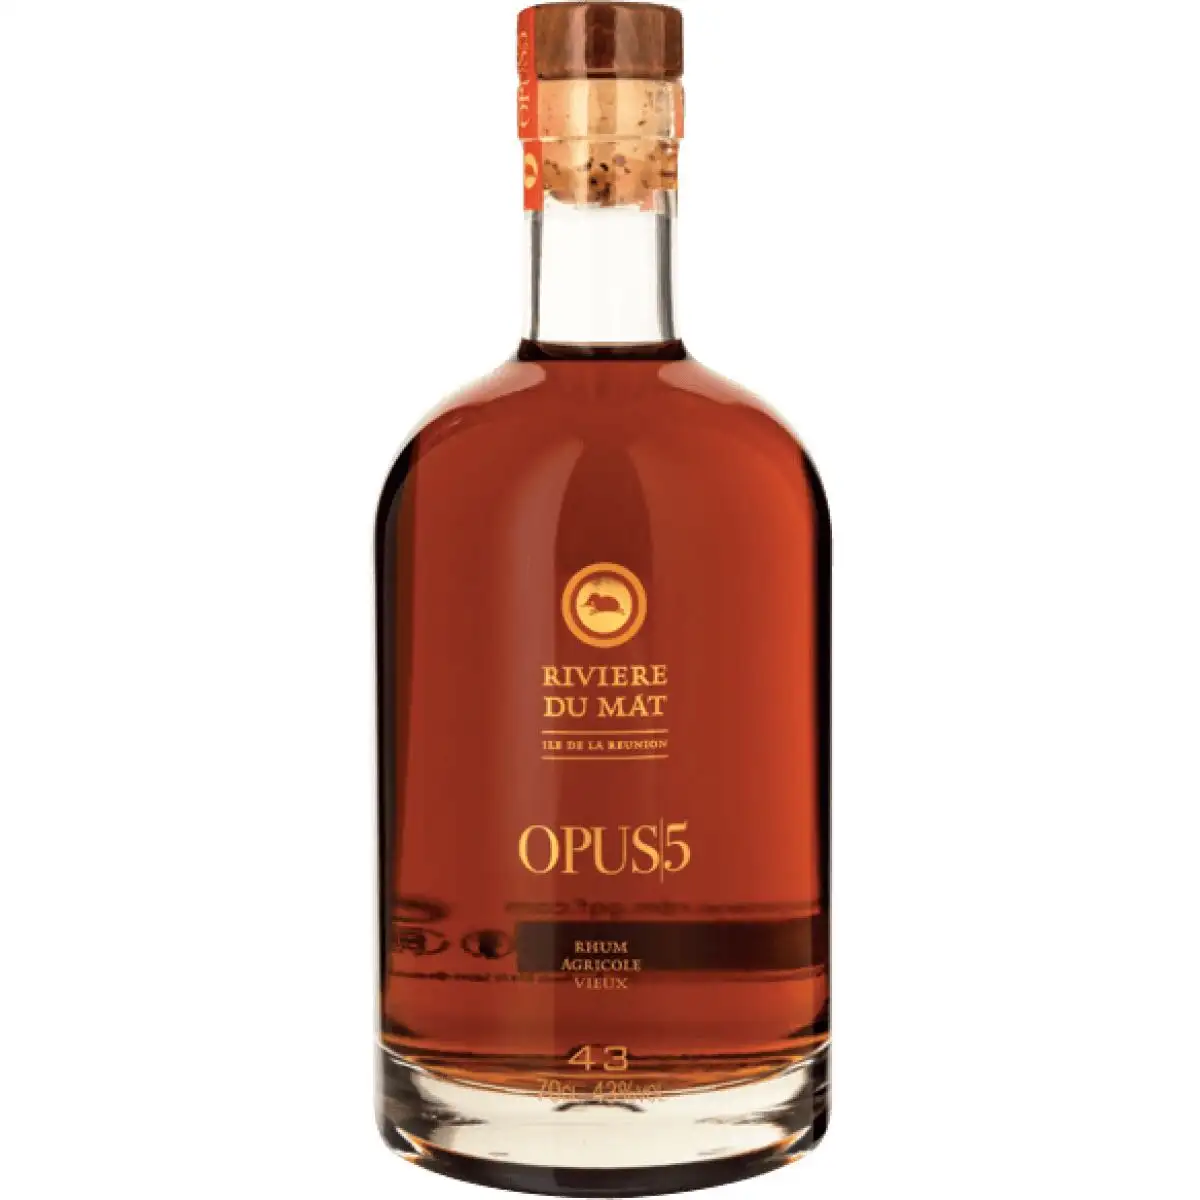 Image of the front of the bottle of the rum Opus 5